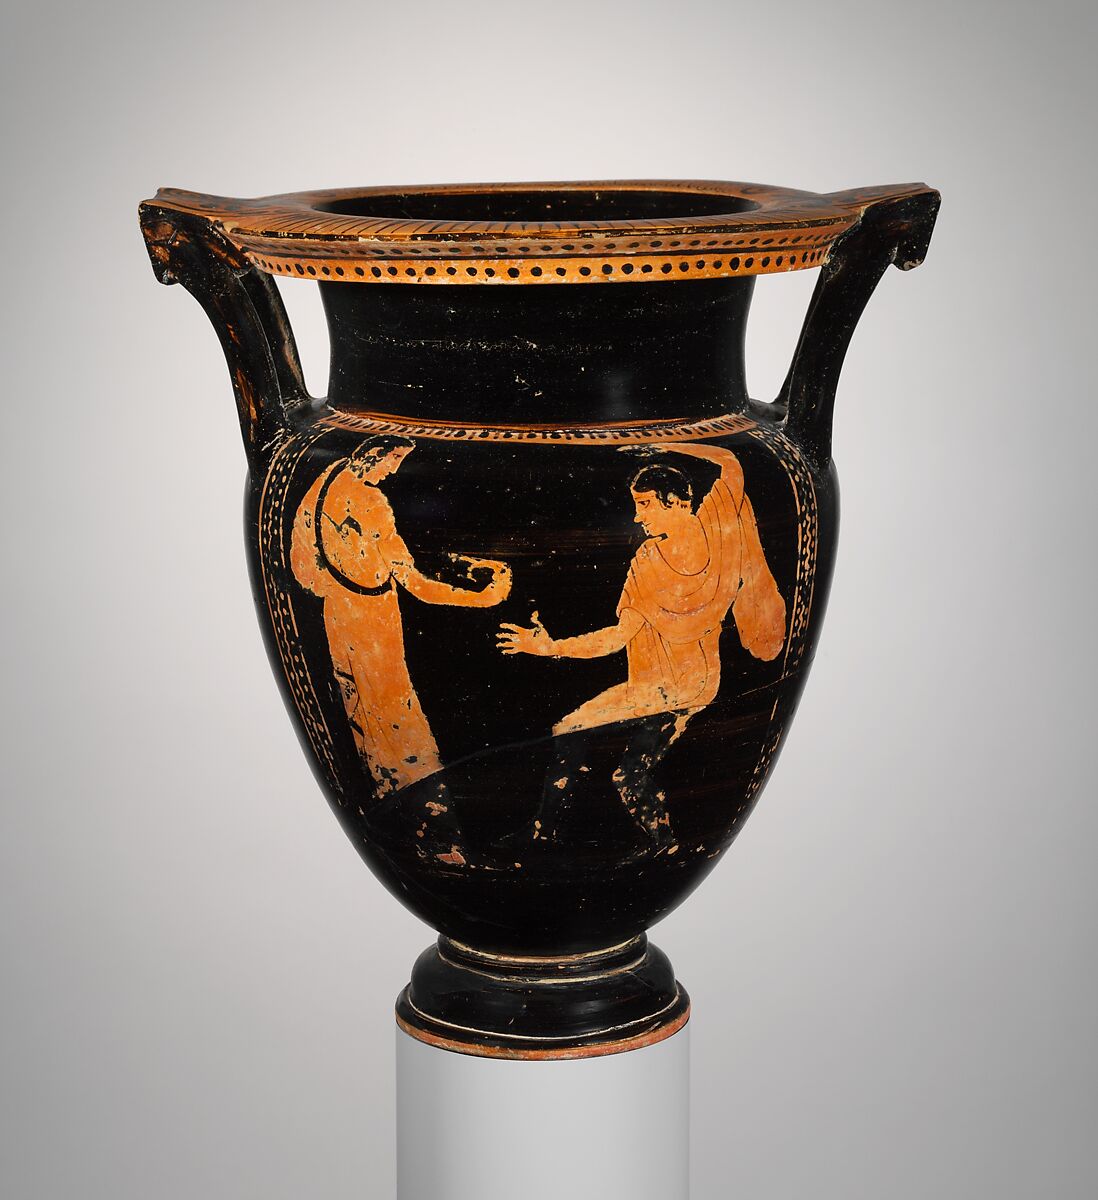 Terracotta column-krater (bowl for mixing wine and water), Attributed to the Praxias Group, Terracotta, Etruscan 